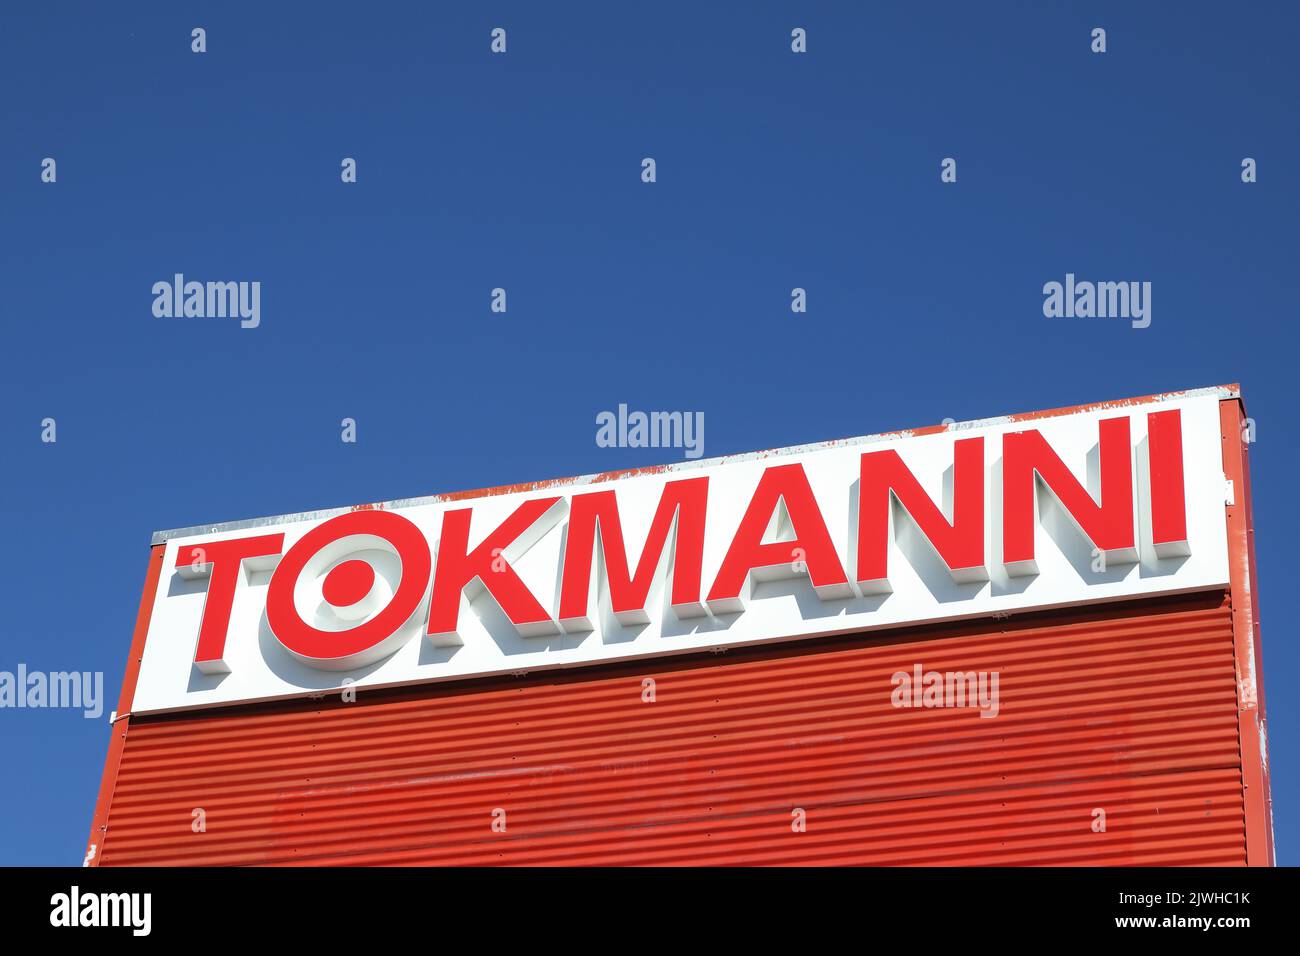 Tornio, Finland - August 29, 2022: Close-up view of the Tokmanni low-price retail chain shop logo. Stock Photo